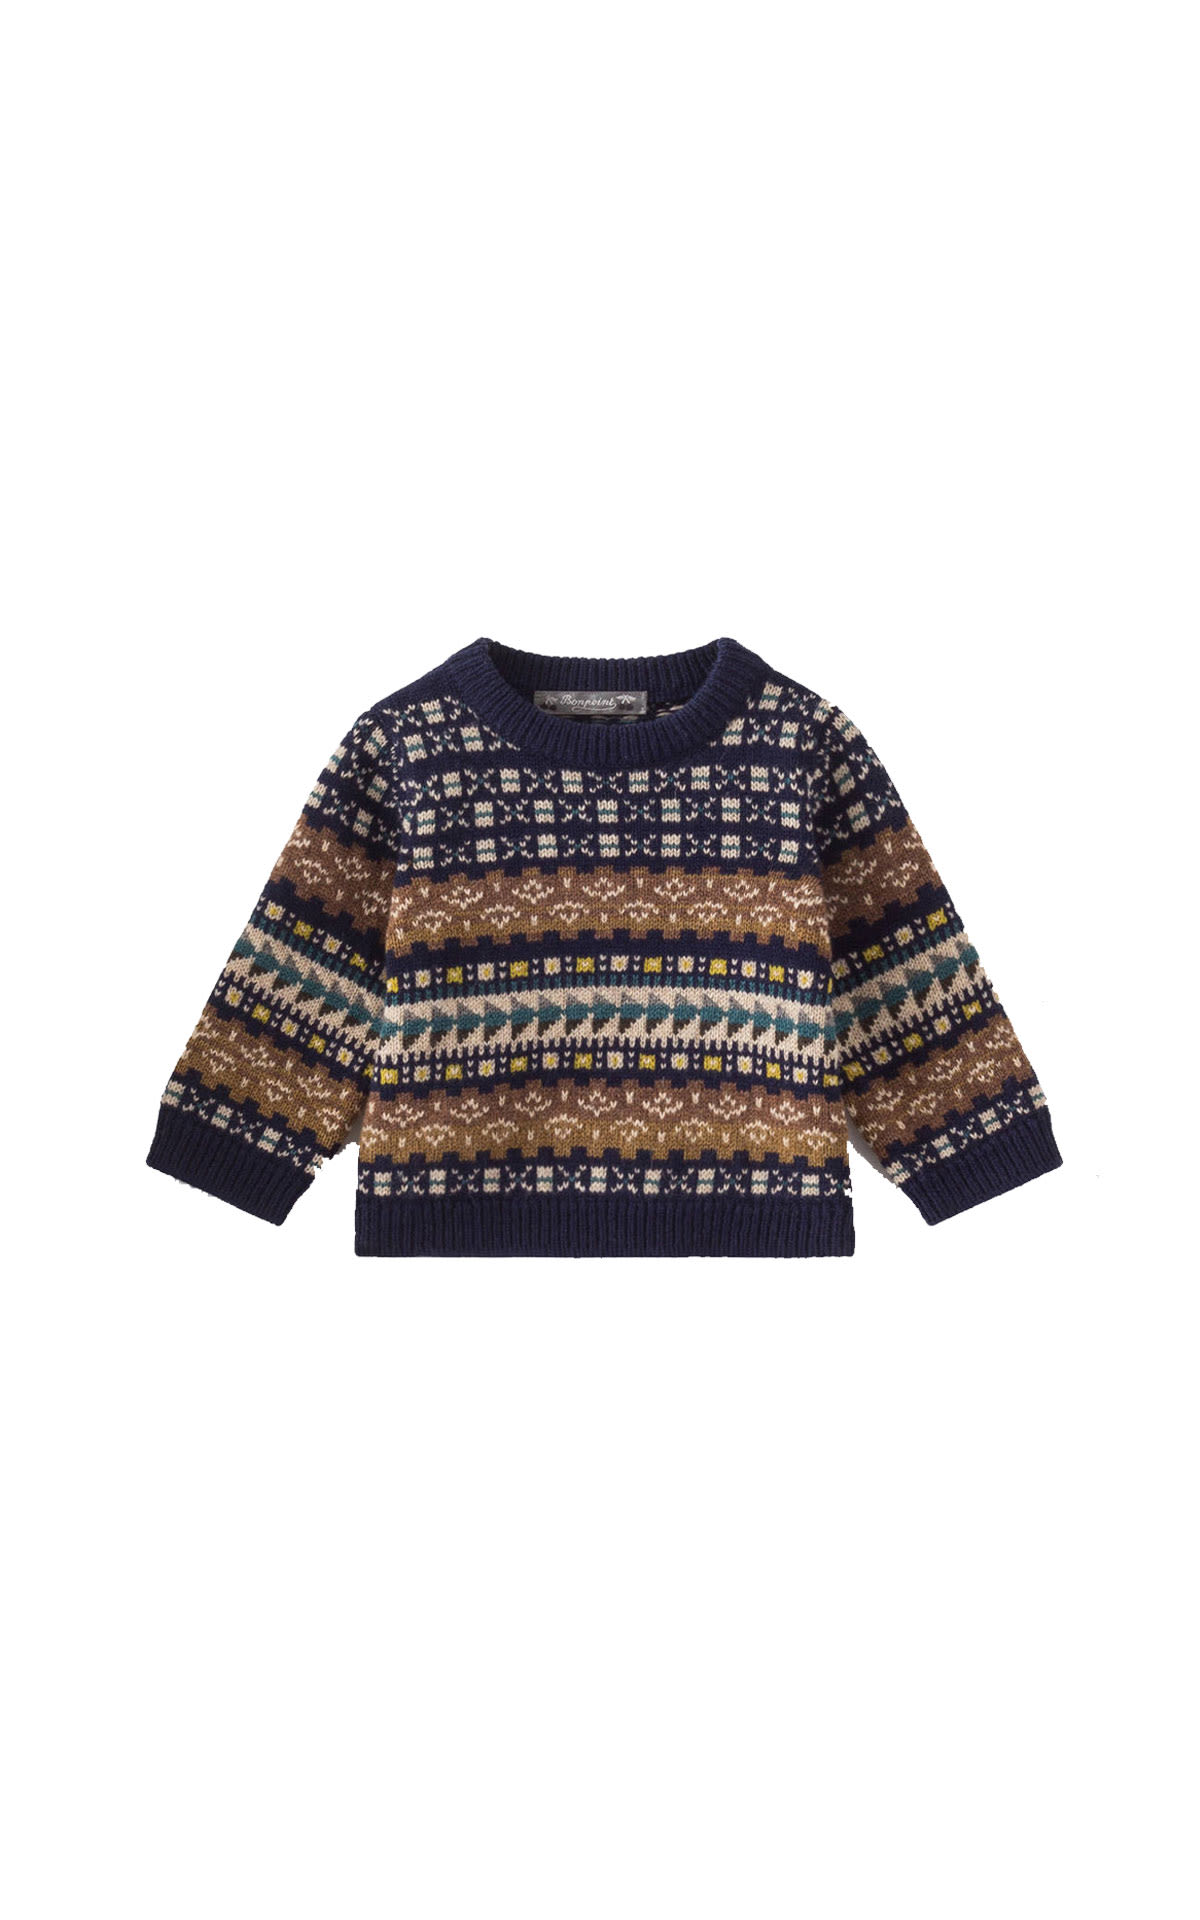 Bonpoint Baby patterned sweater from Bicester Village